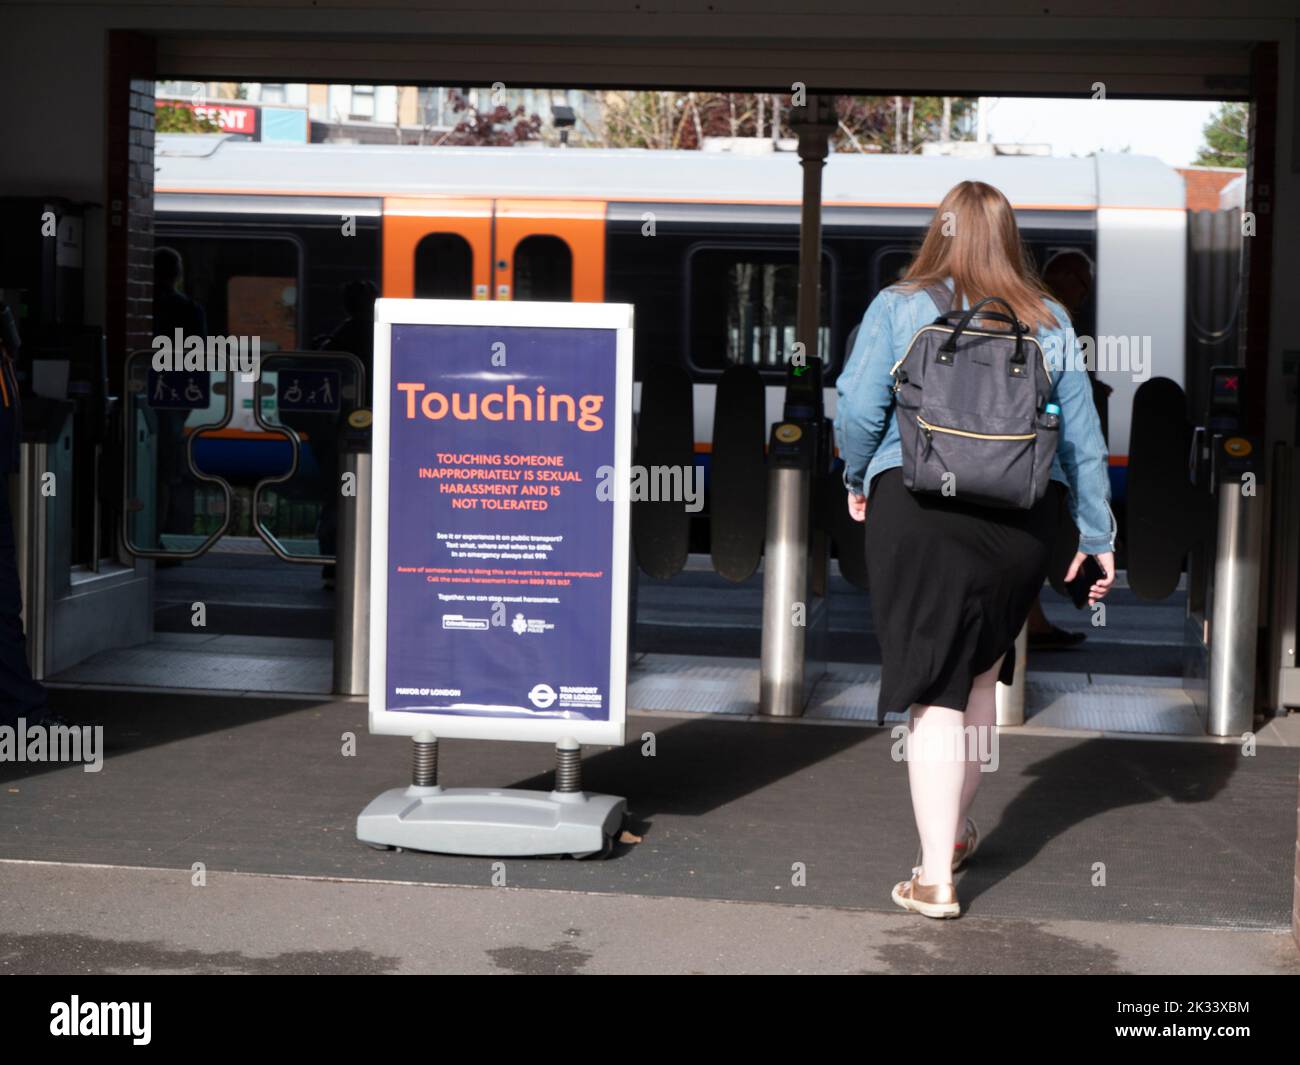 transport for London Overground railway entrance to platform barriers with sign Touching someone inappropriately is sexual harrassment and is not tolerated Stock Photo